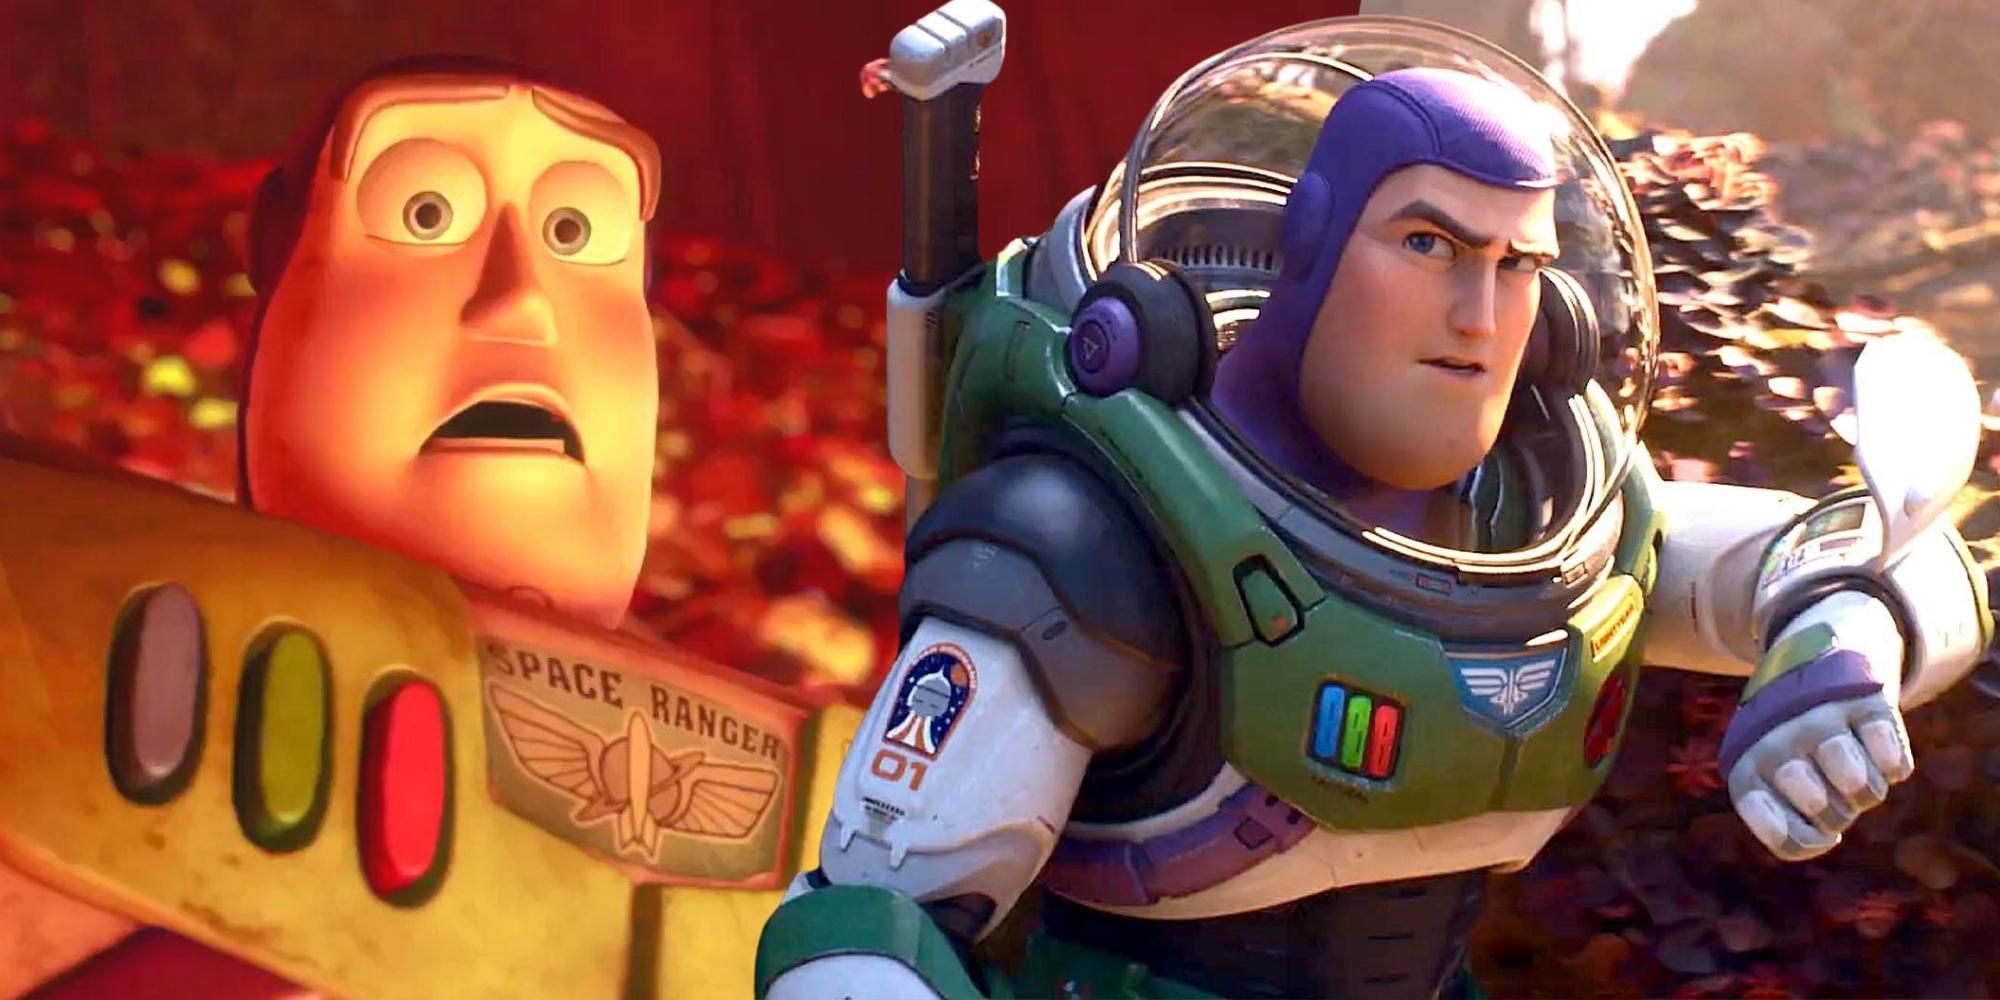 Buzz Lightyear in Toy Story 3 and Lightyear